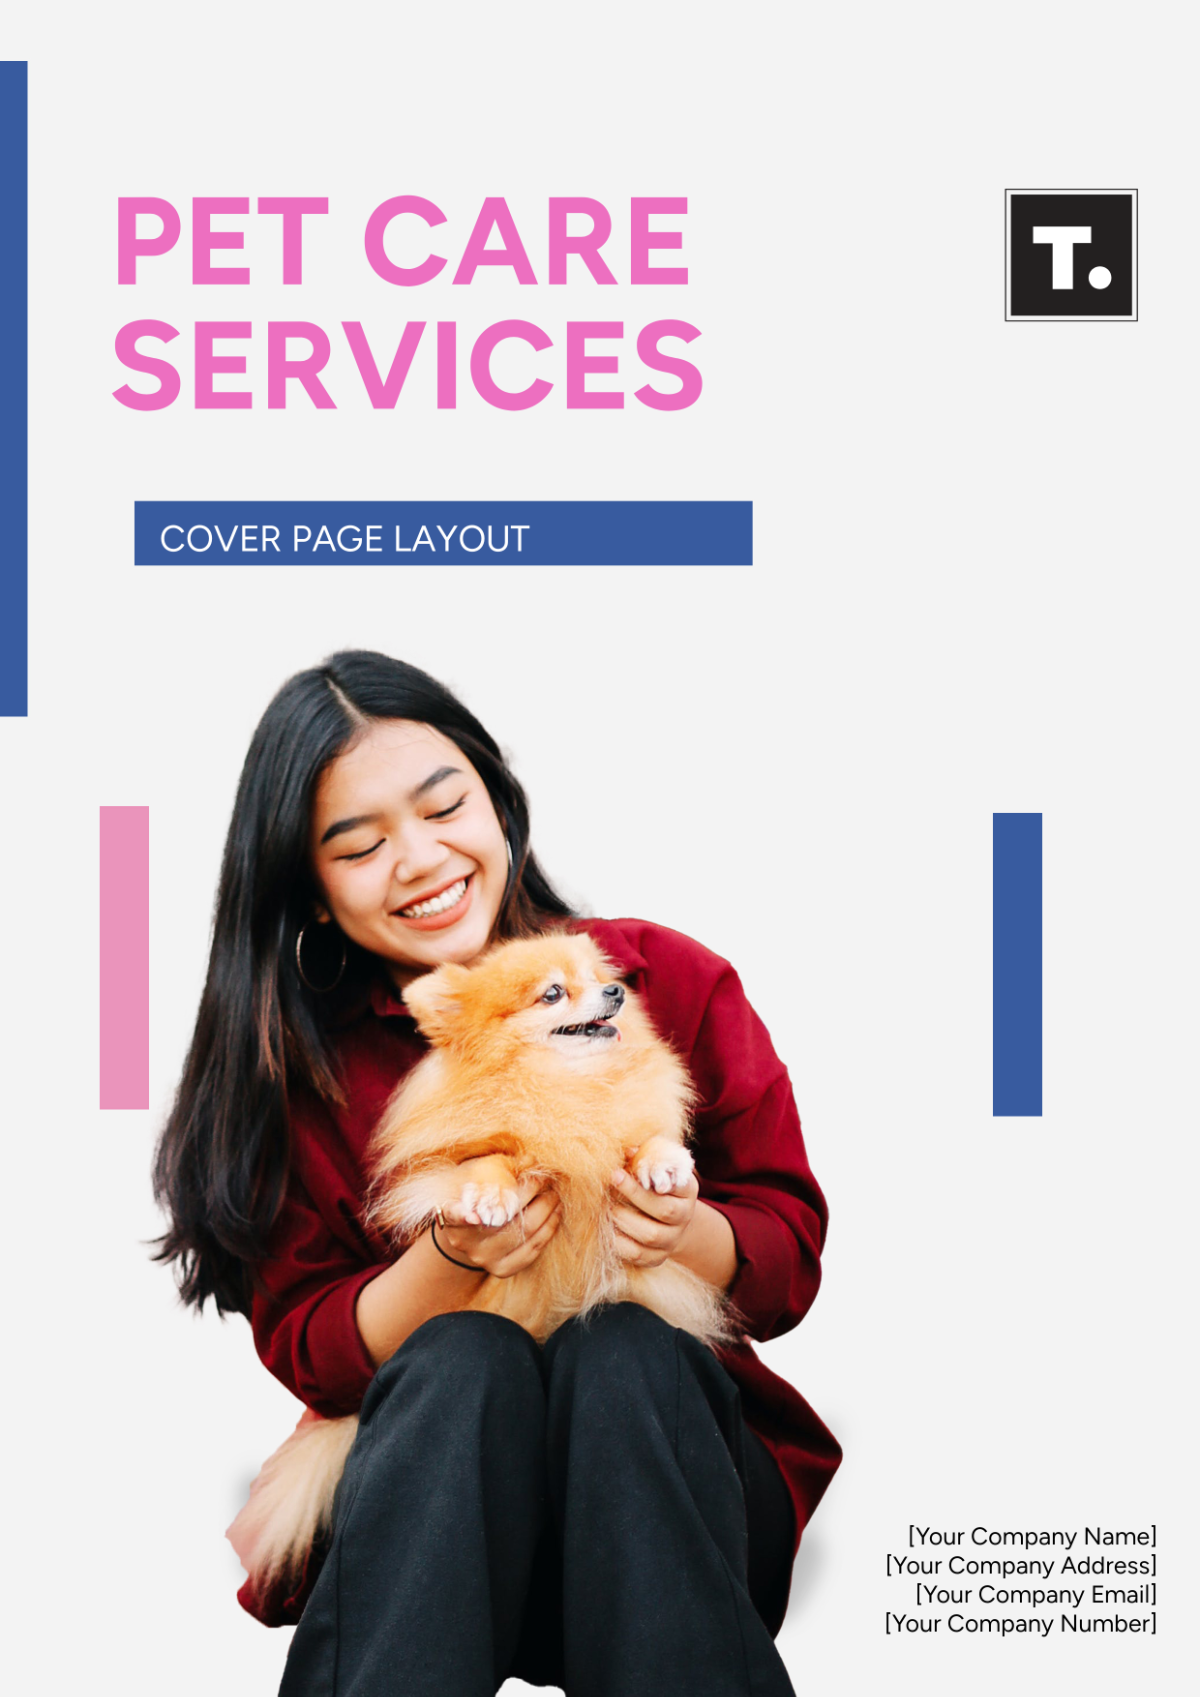 Pet Care Services Cover Page Layout